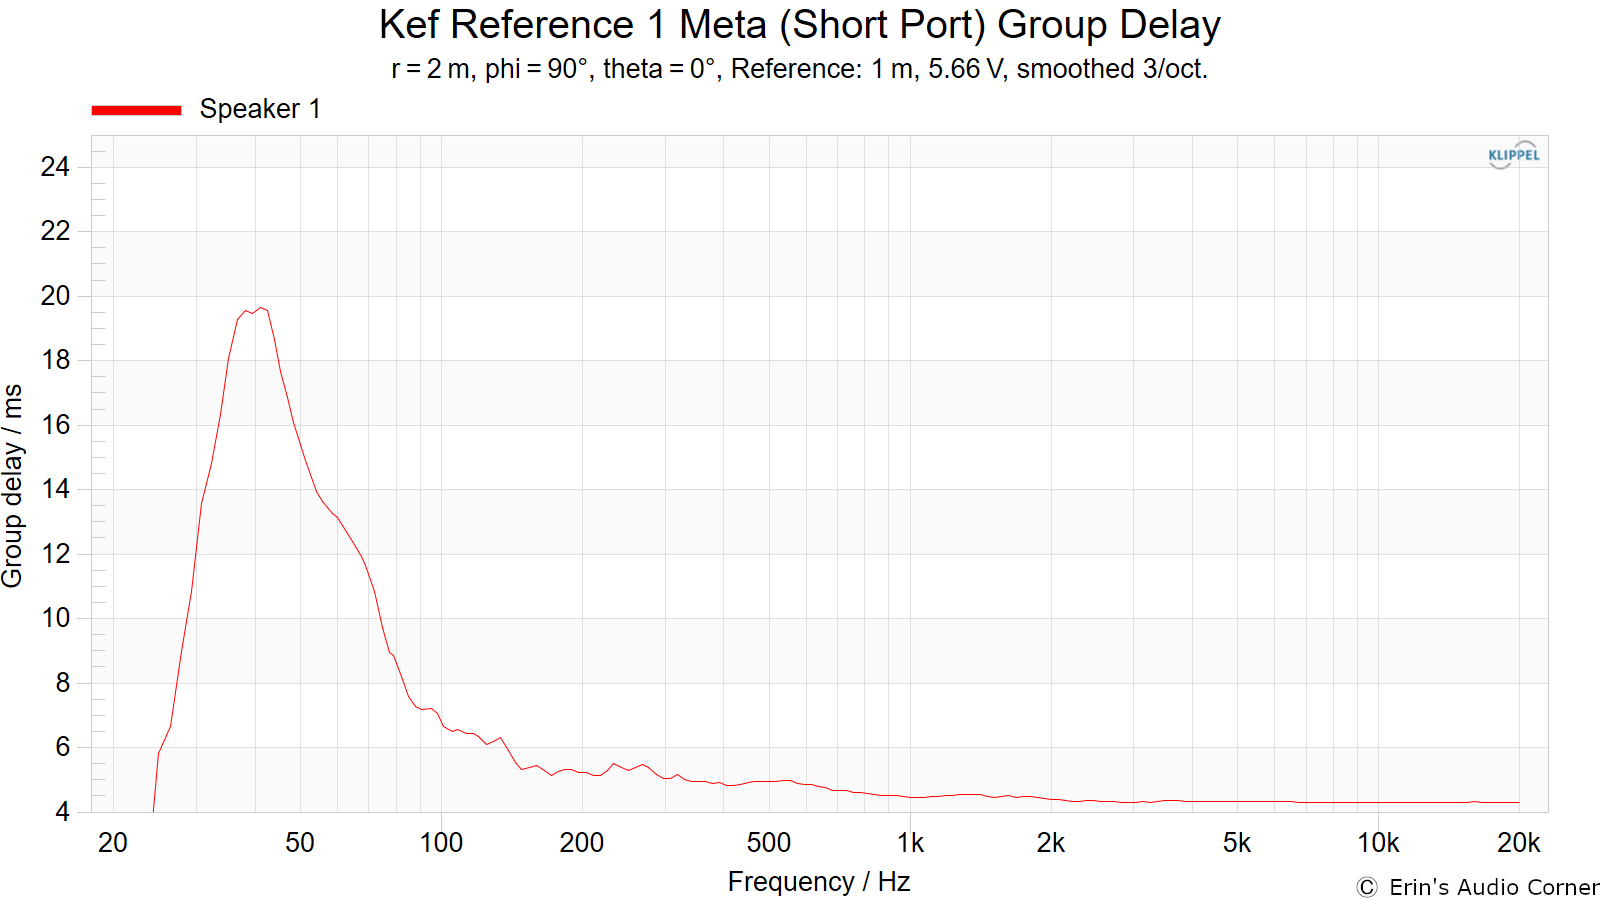 Kef Reference 1 Meta (Short Port) Group Delay.png